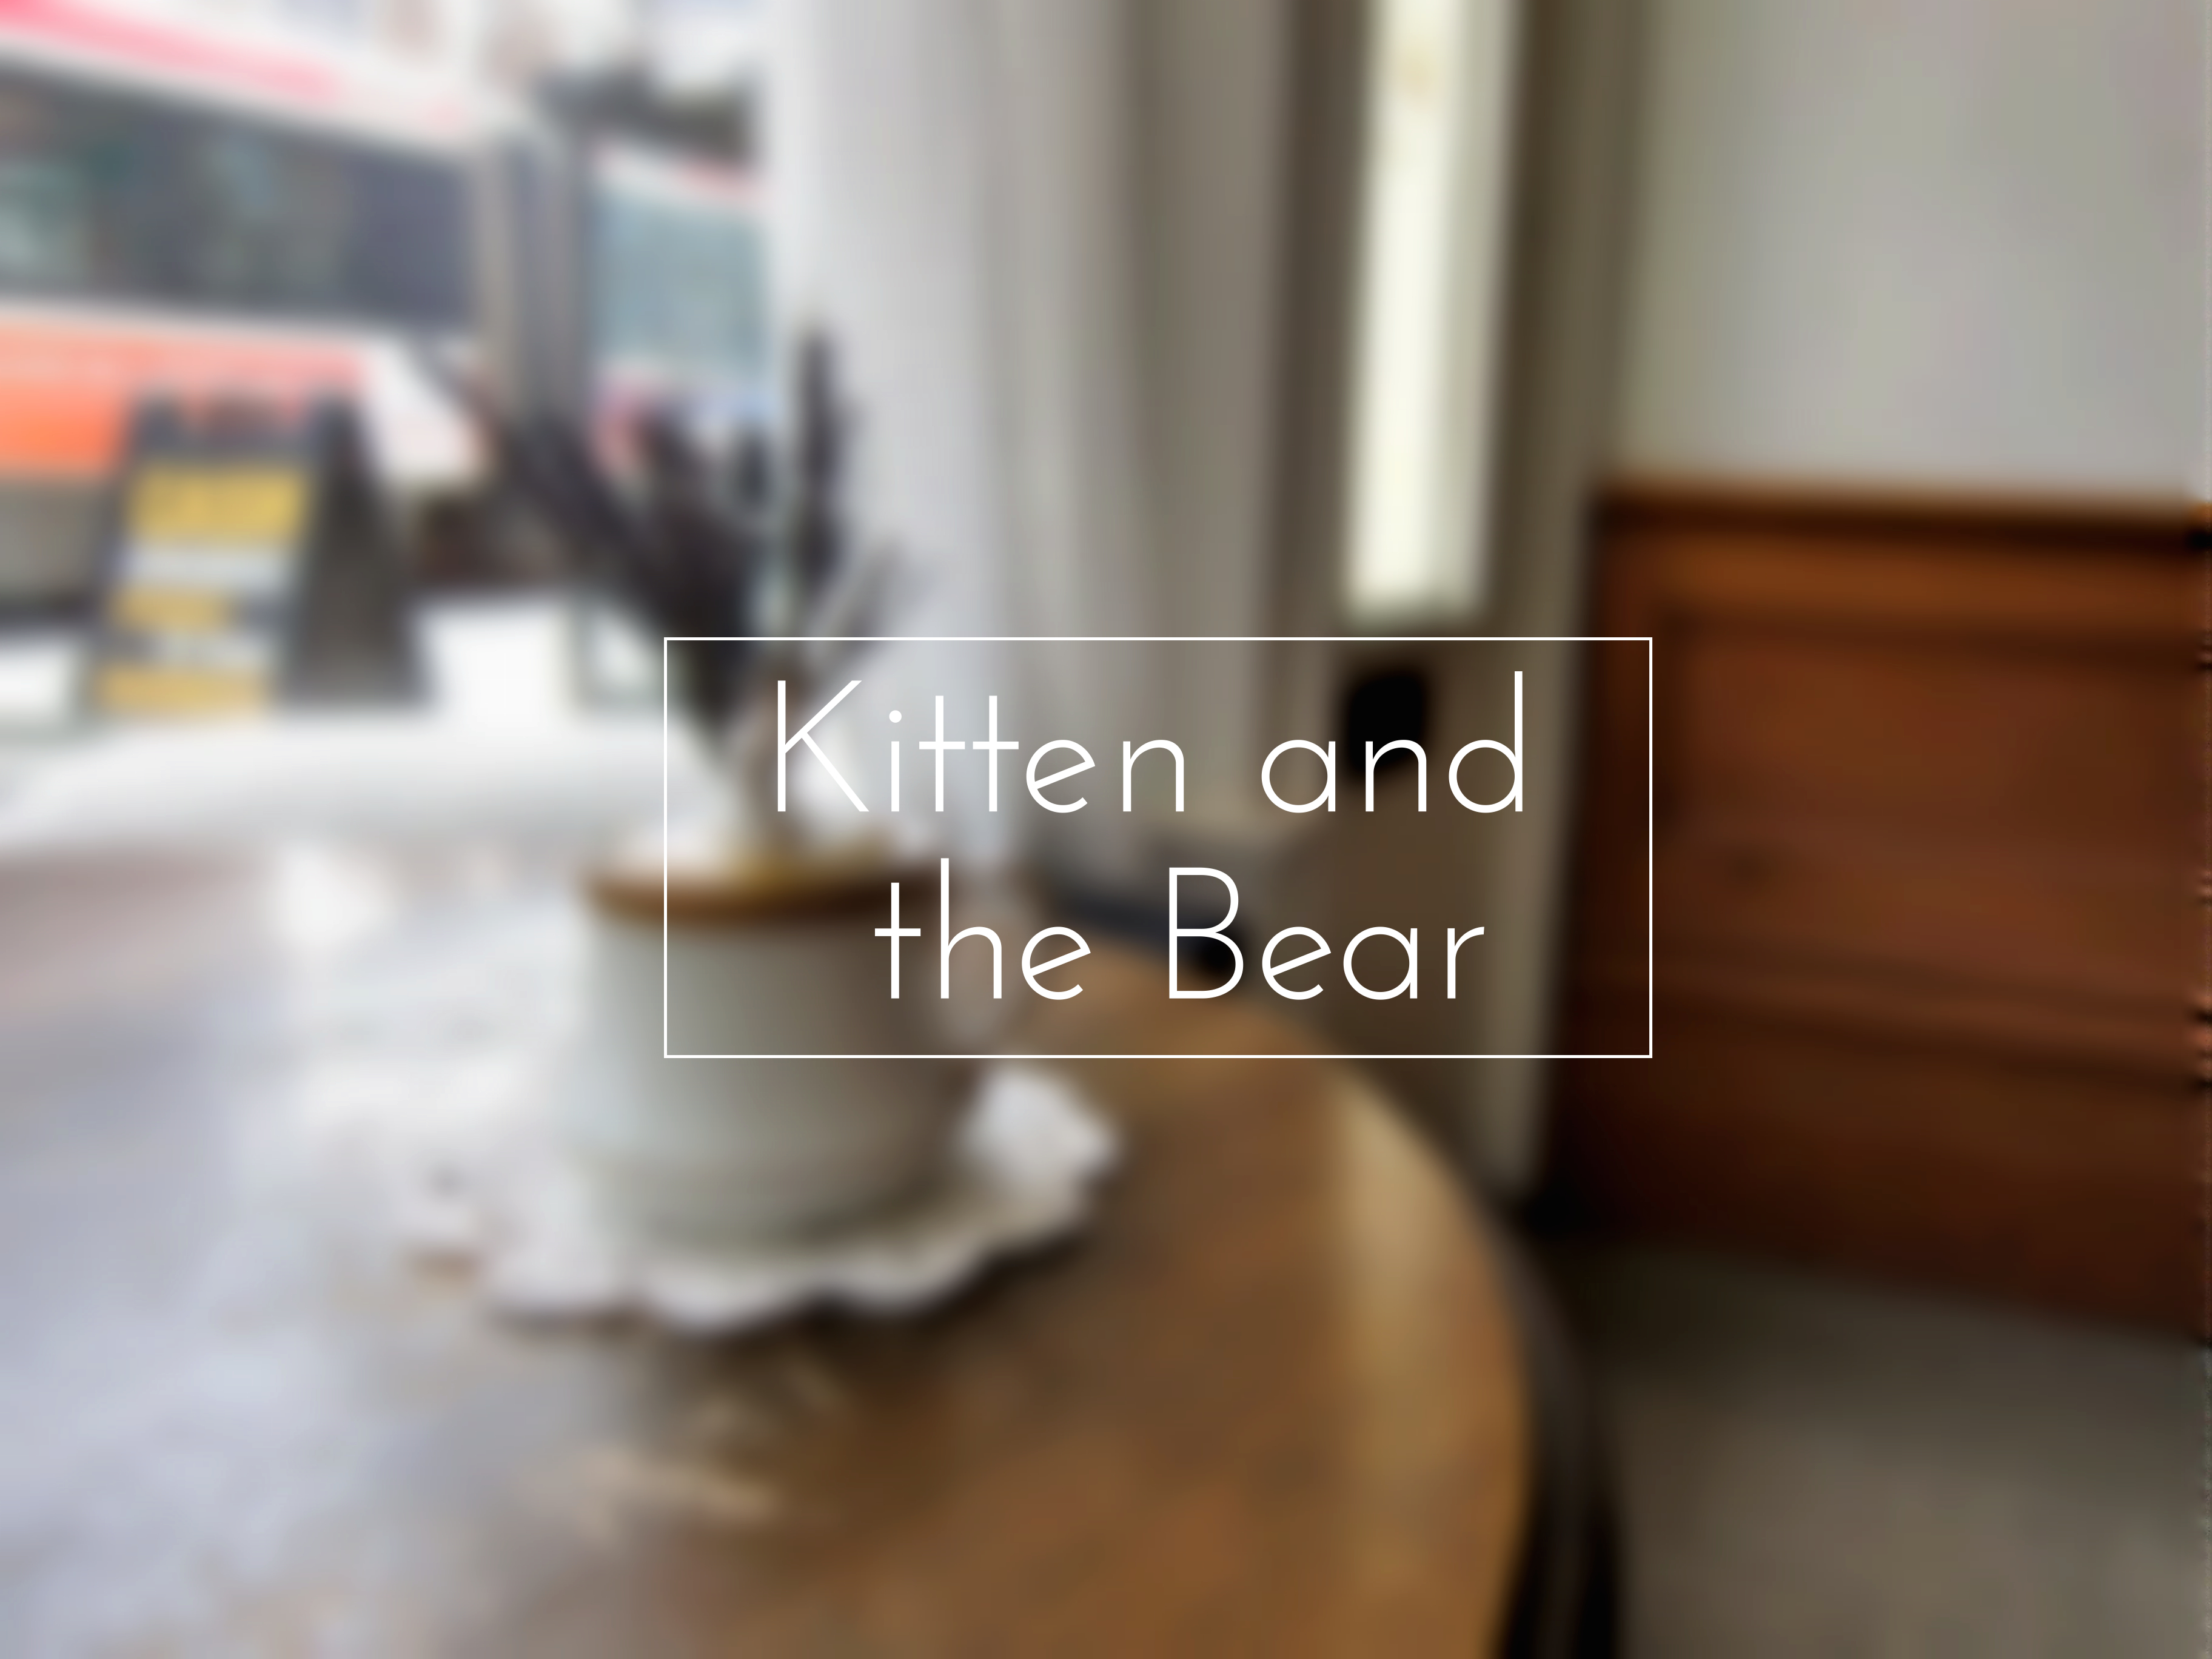 [TO] Scones & Jam – Kitten and the Bear